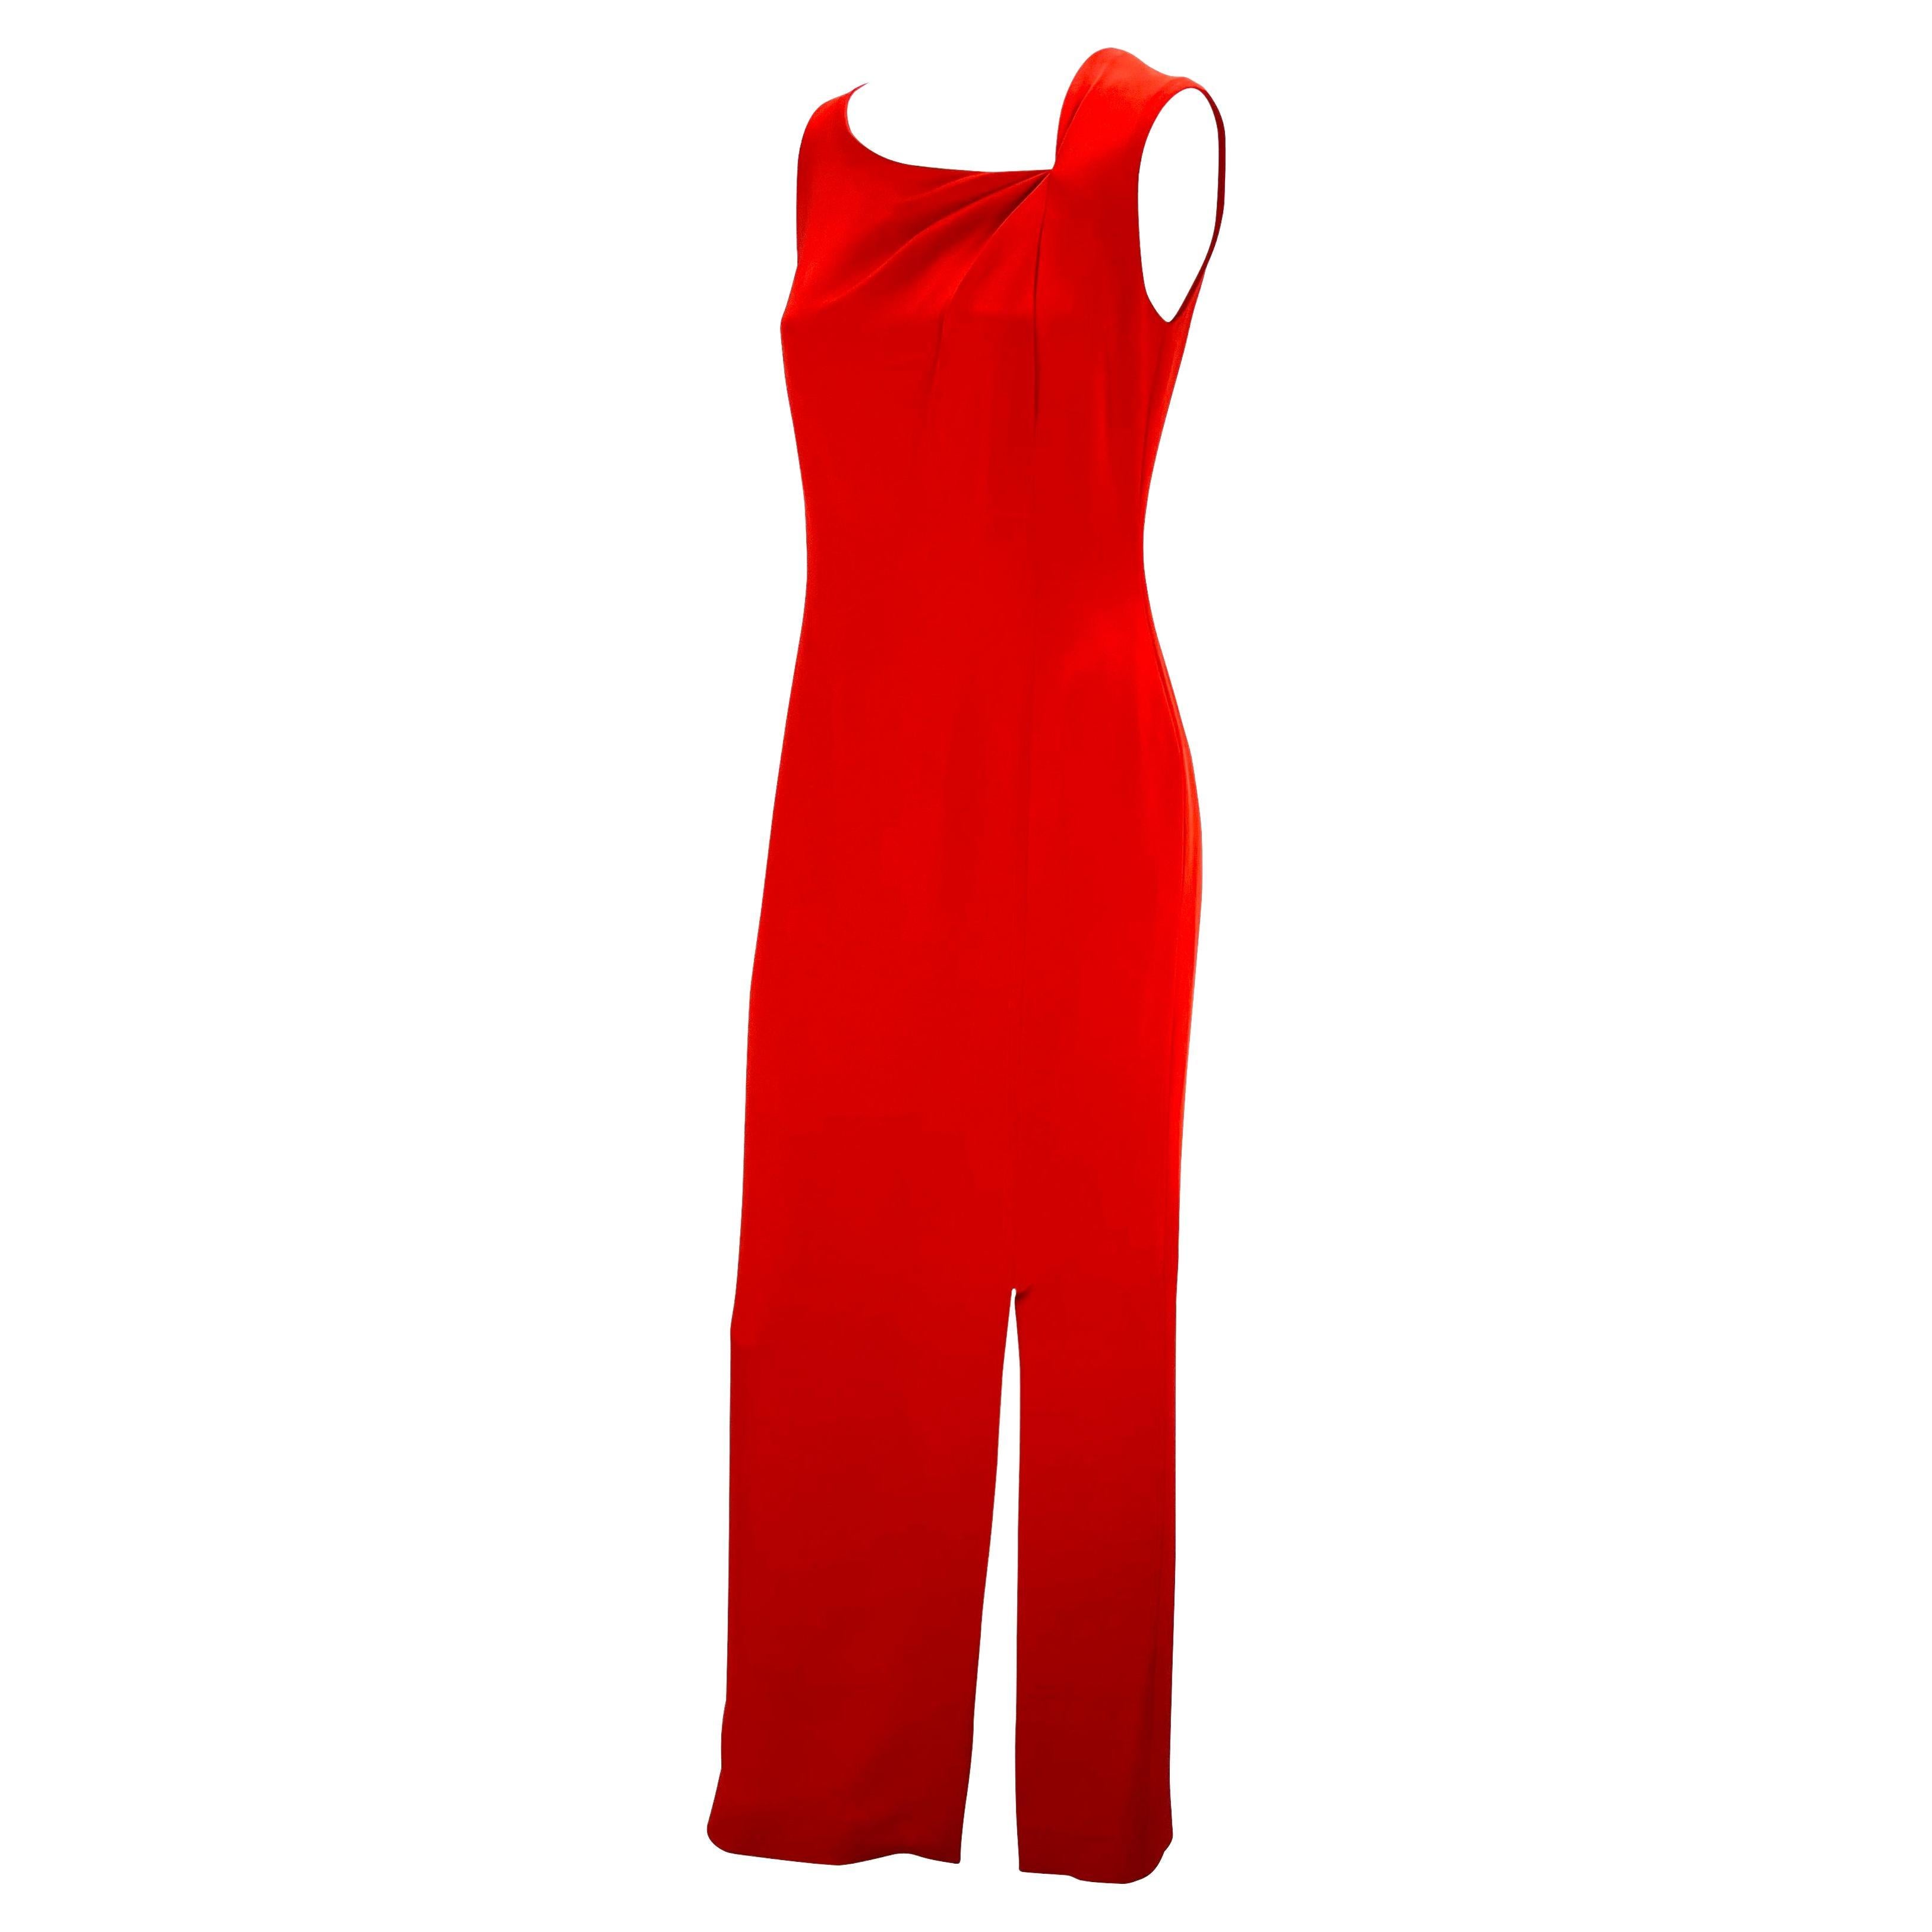 Presenting a beautiful red full-length sleeveless Bill Blass Couture gown. From the 1990s, this elegant and timeless column style gown features an asymmetric neckline with gathered fabric to create dimension. The dress is made complete with a